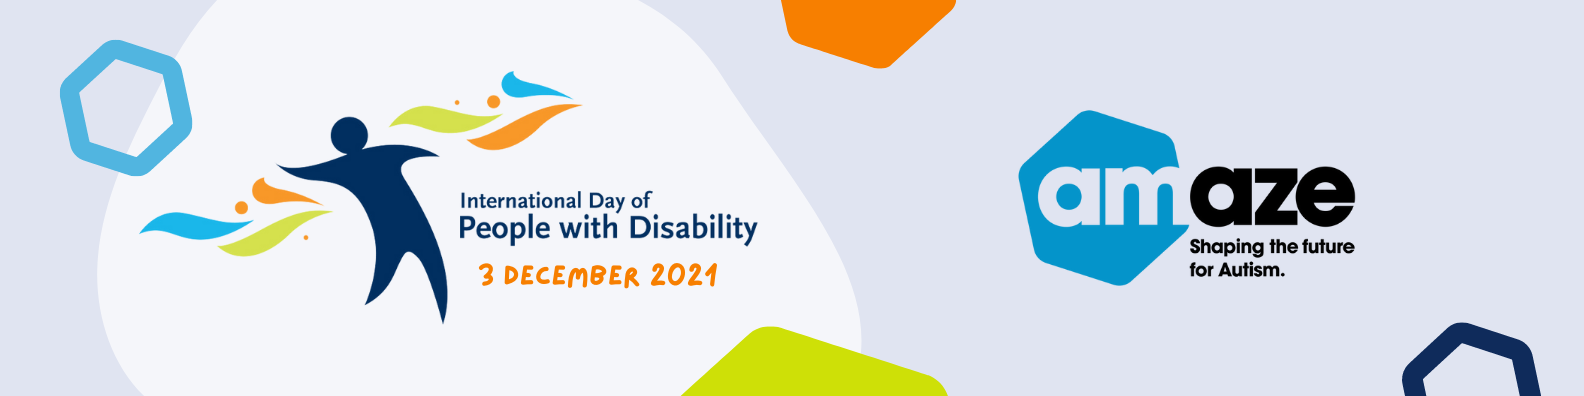 International Day of People with Disability, 3 December 2021. Amaze logo